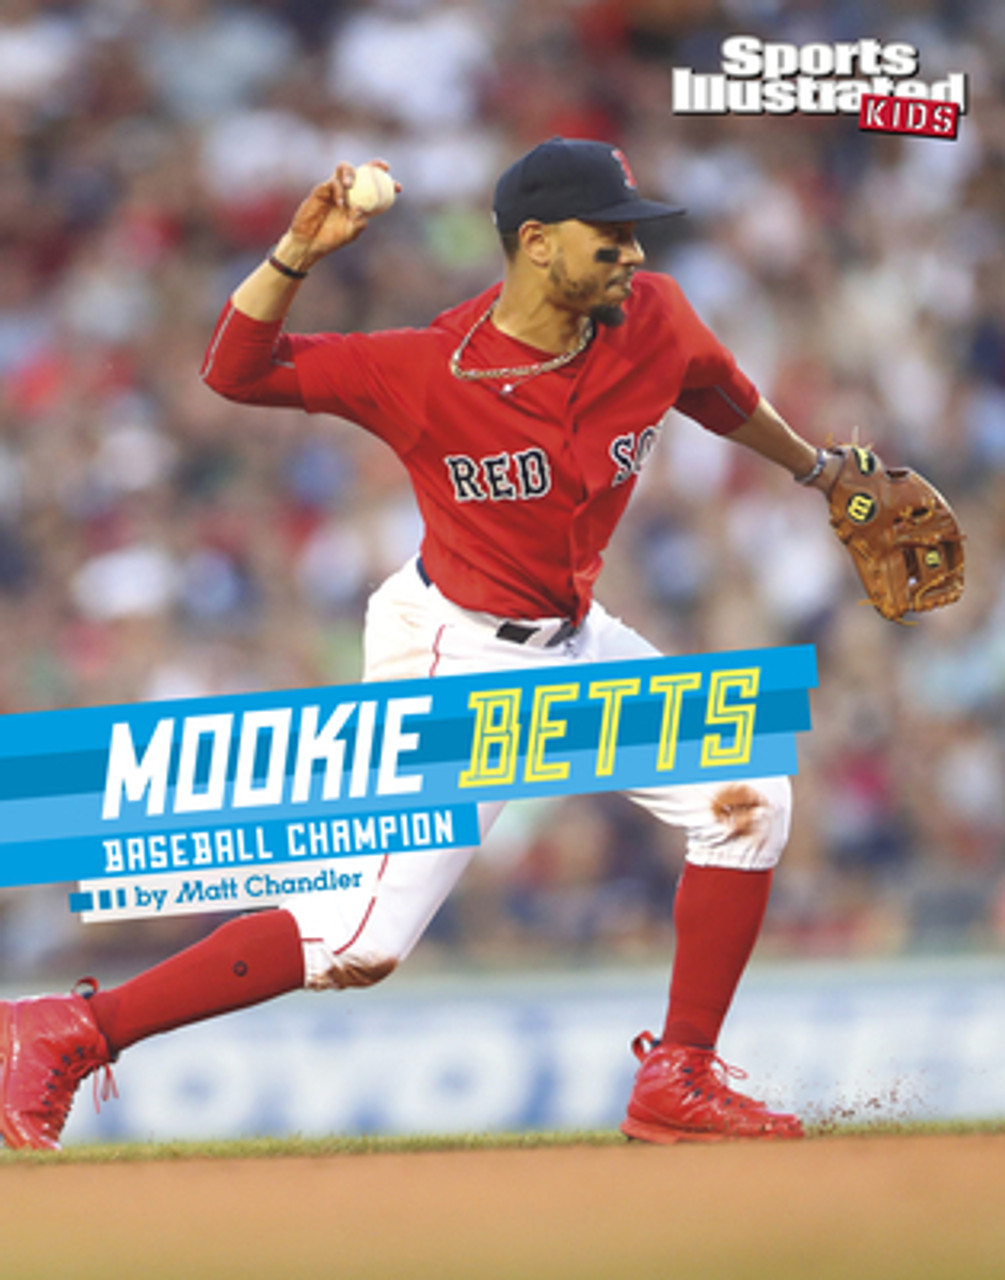 The Best Mookie Betts Baseball Cards to Collect - Sports World Cards